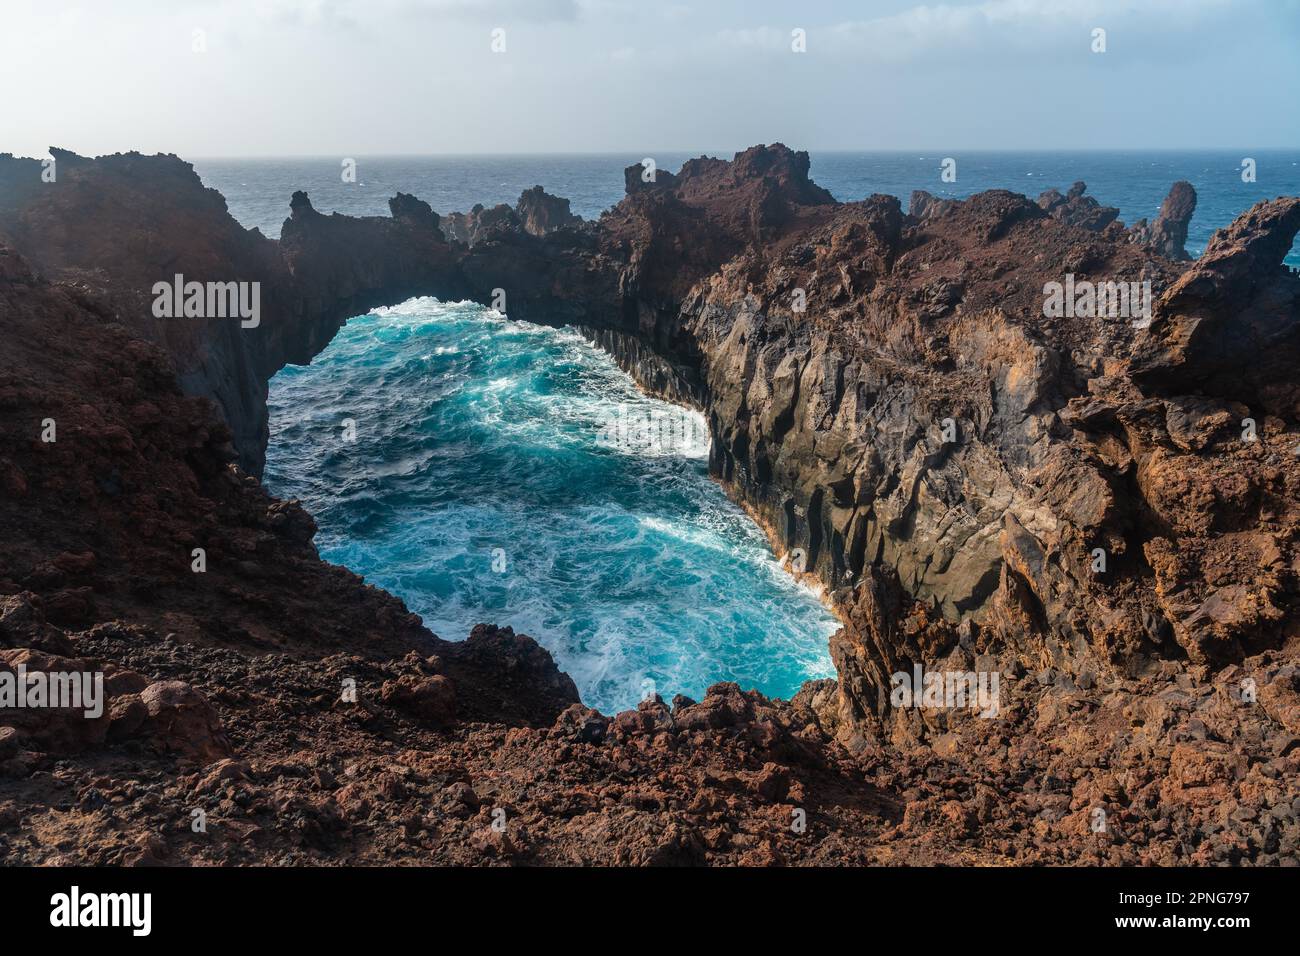 El Hierro Island. Canary Islands, the Arco de la Tosca incredible natural monument of an arch by the sea Stock Photo